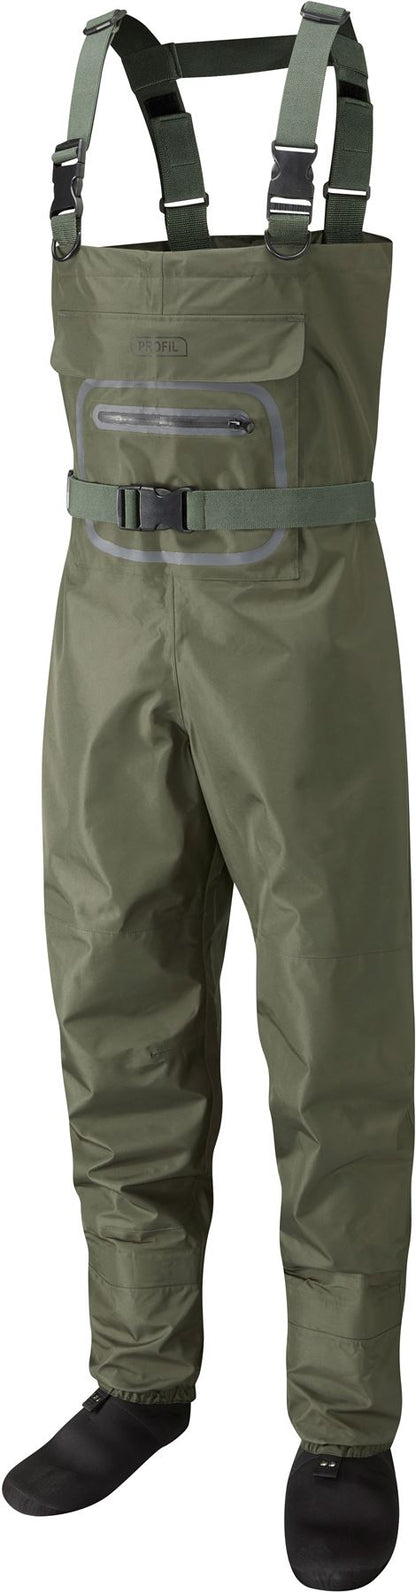 Wychwood Profil Breathable Chest Waders